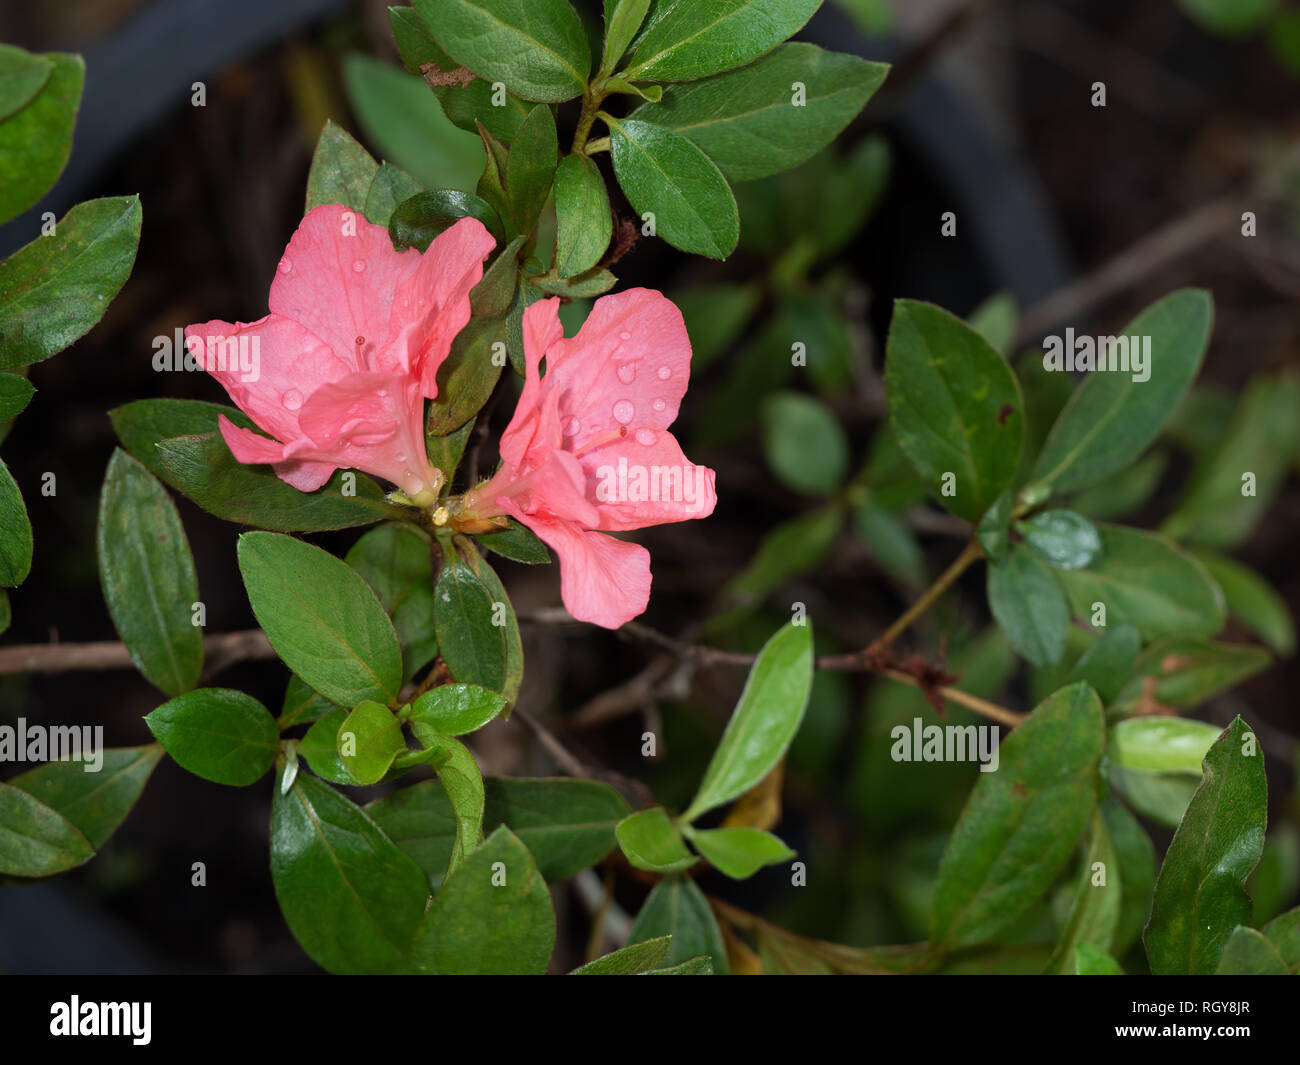 Closeup Pink Rhododendron arboreum Flowers with Green Leaves Stock Photo